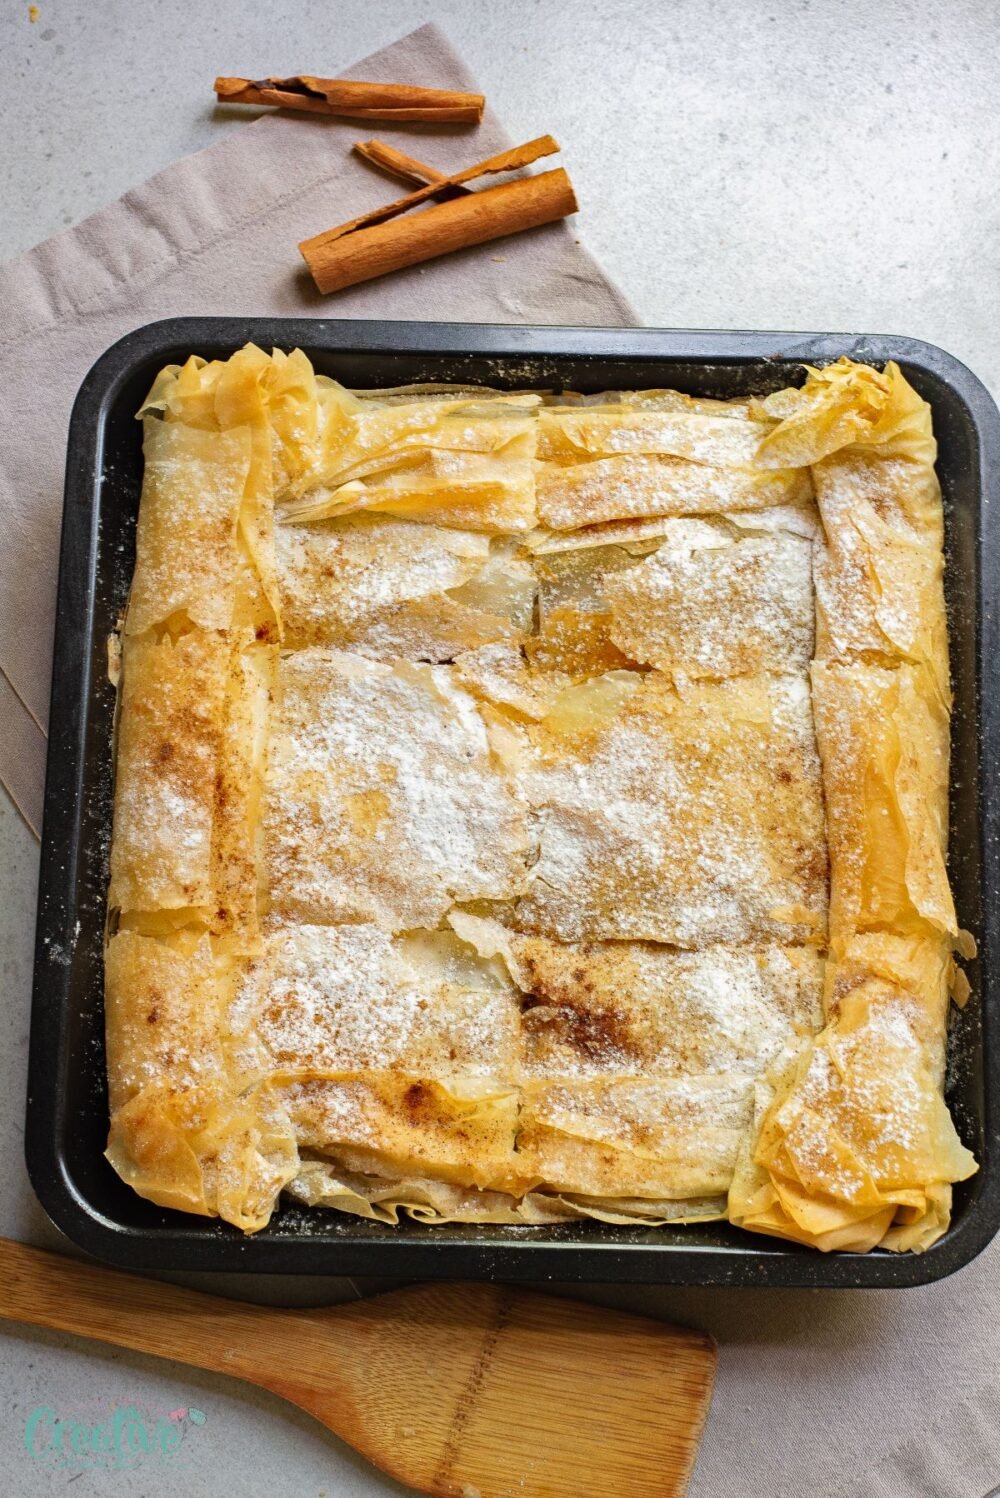 This filo pumpkin pie combines the classic flavors of autumn with the delicate texture of filo pastry, resulting in a dessert that is both elegant and homey.